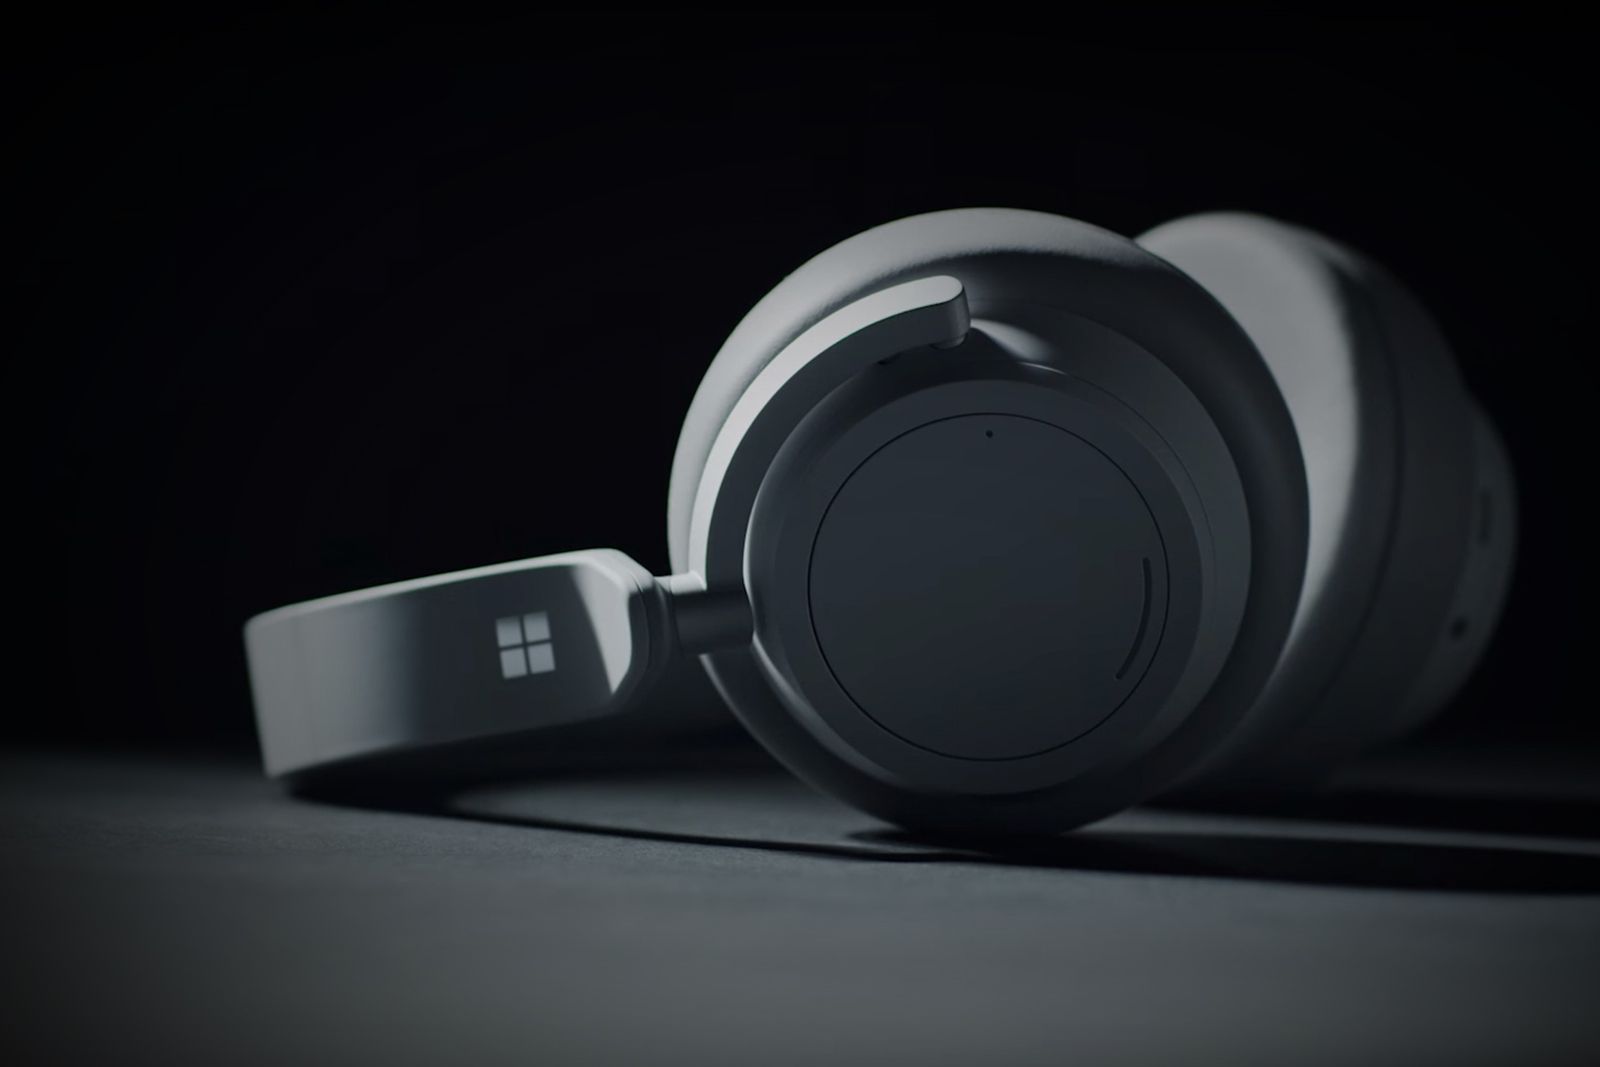 Microsofts new Surface Headphones support Cortana voice commands image 1